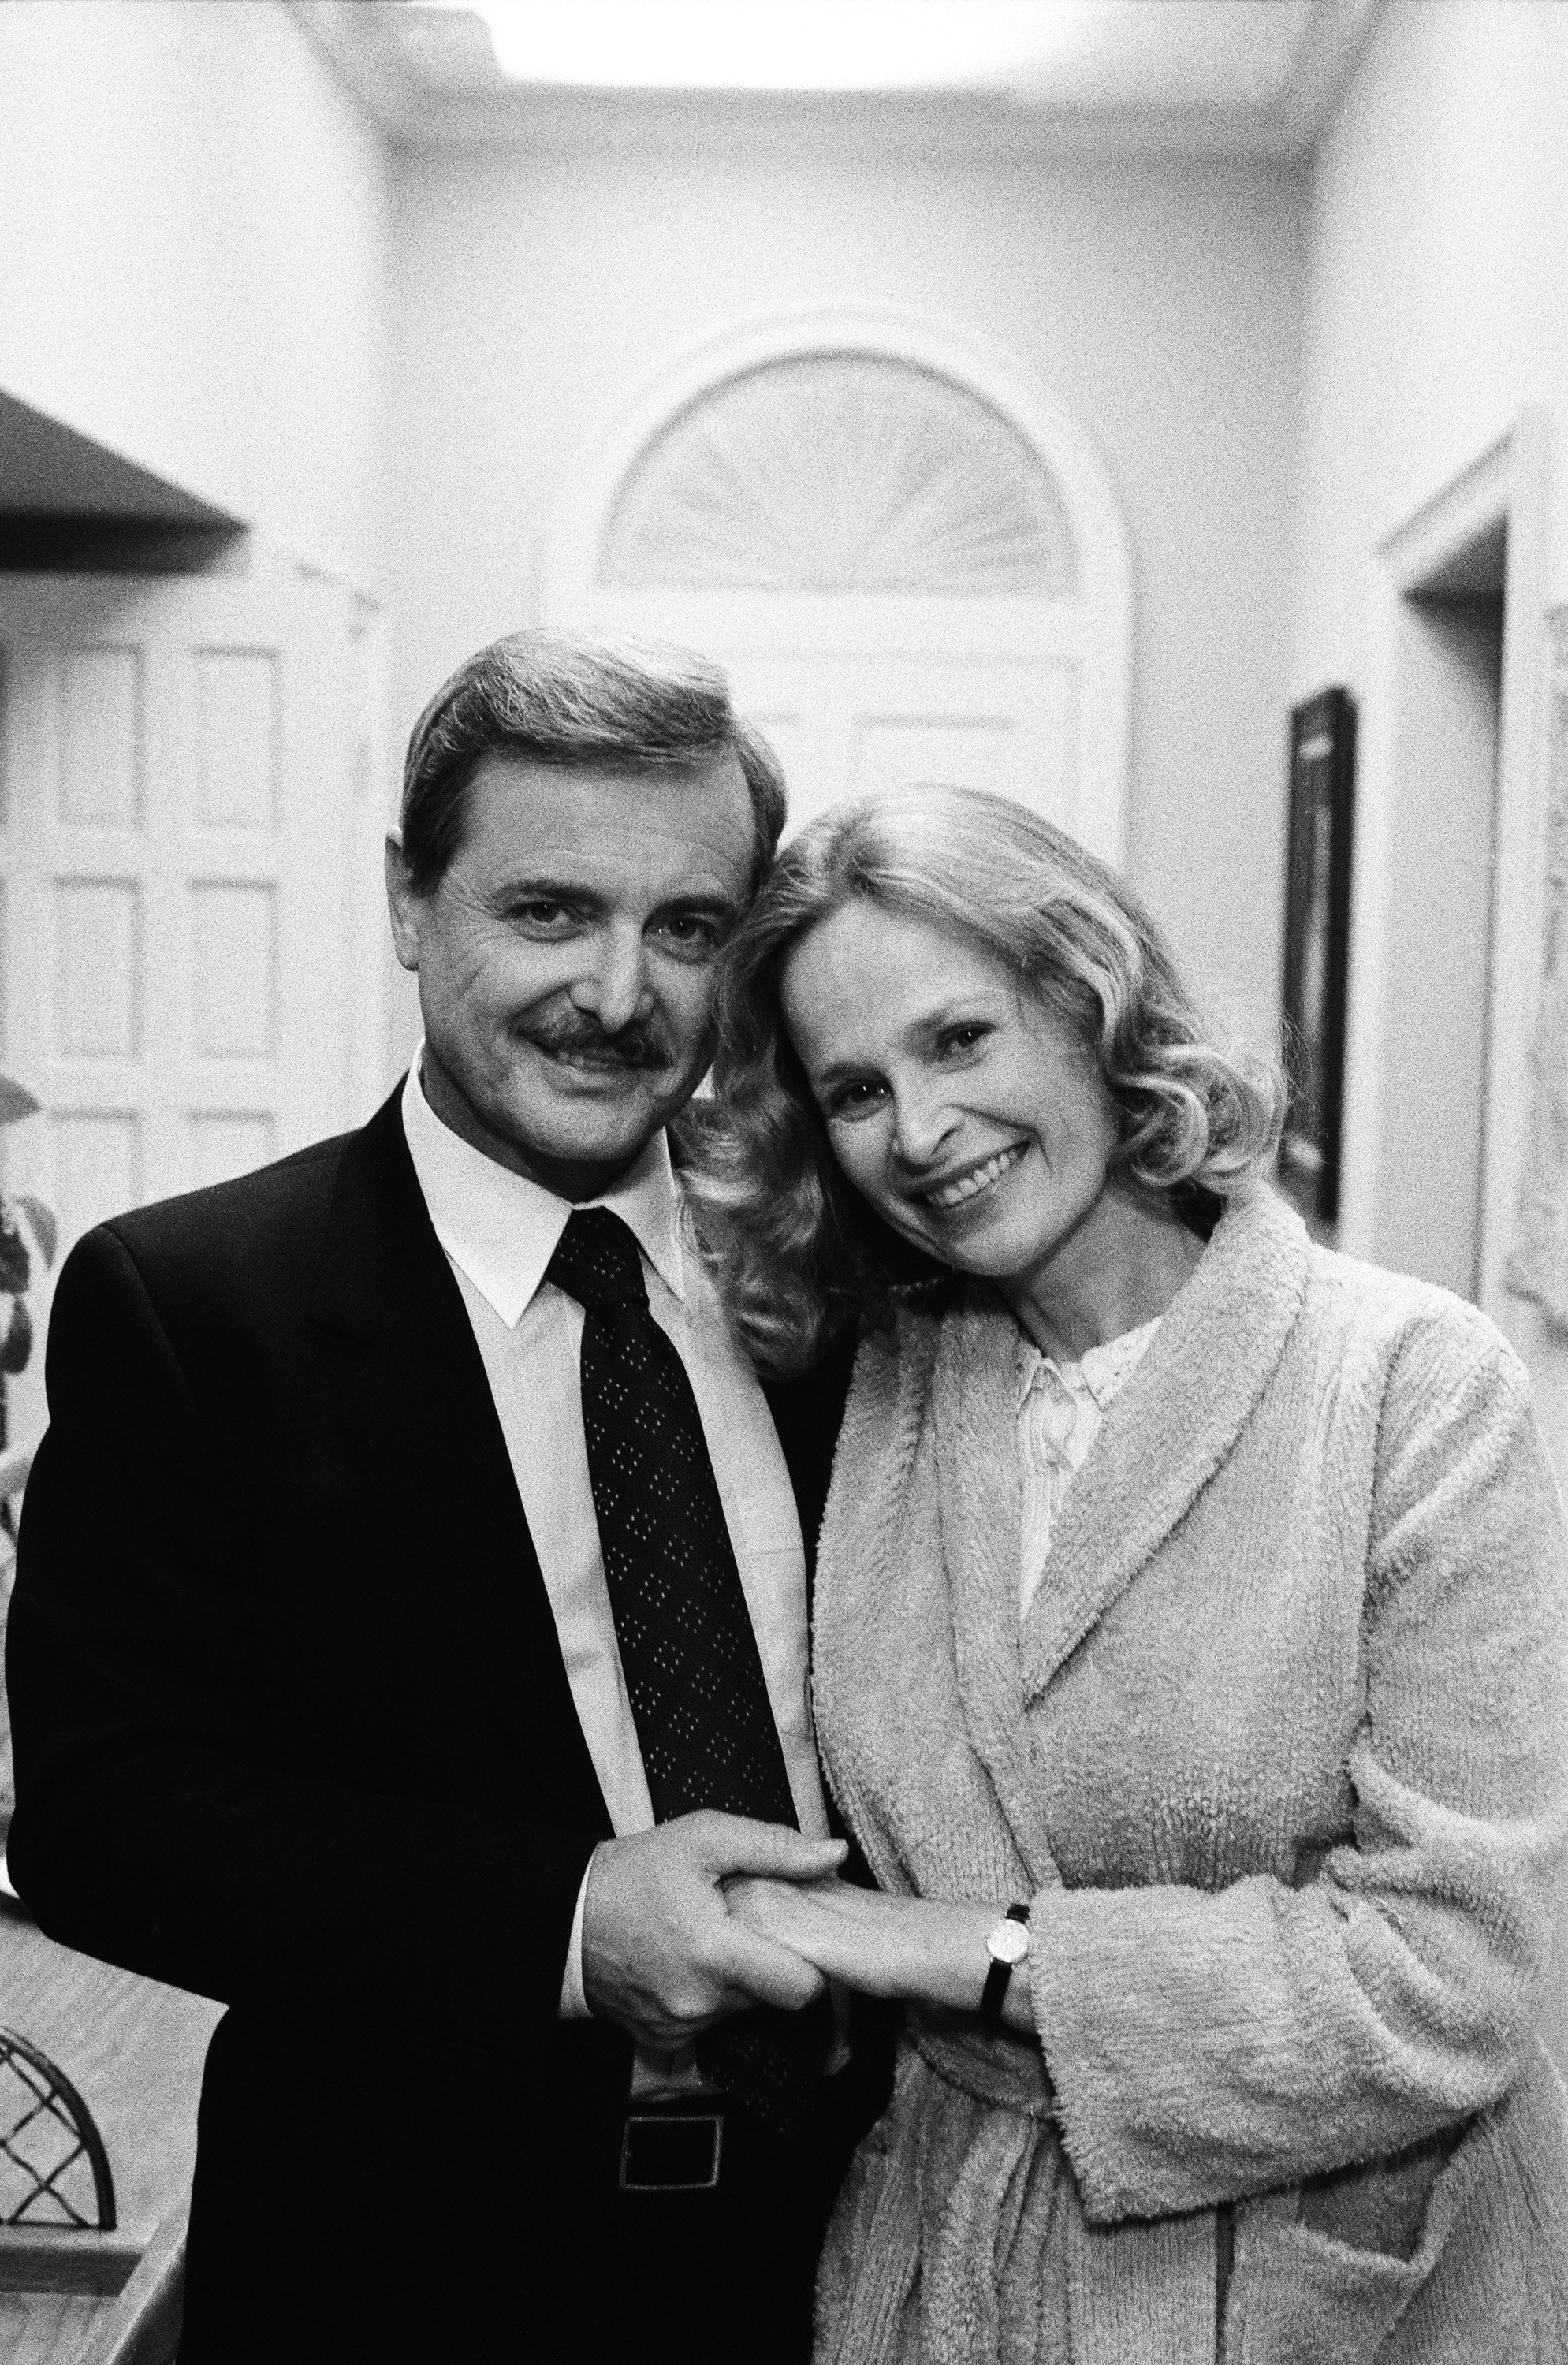 William Daniels as Doctor Mark Craig and Bonnie Bartlett as Ellen Craig on "St. Elsewhere" on April 12, 1983 | Source: Getty Images